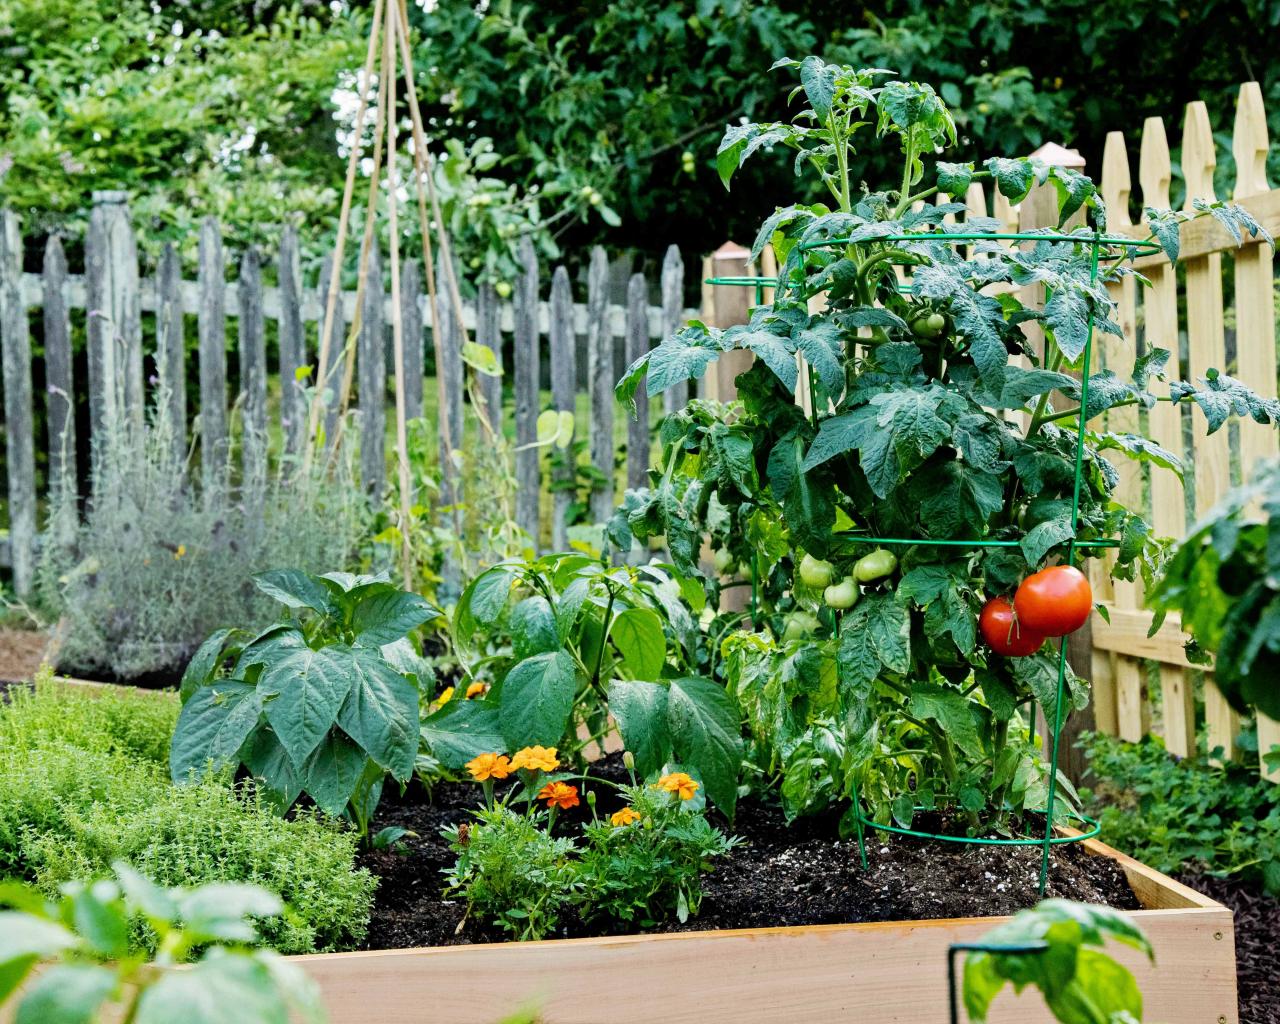 Grow Delicious Produce from This Summer's Garden | Tomatoes, Pole Beans, Peppers, Eggplant & More!